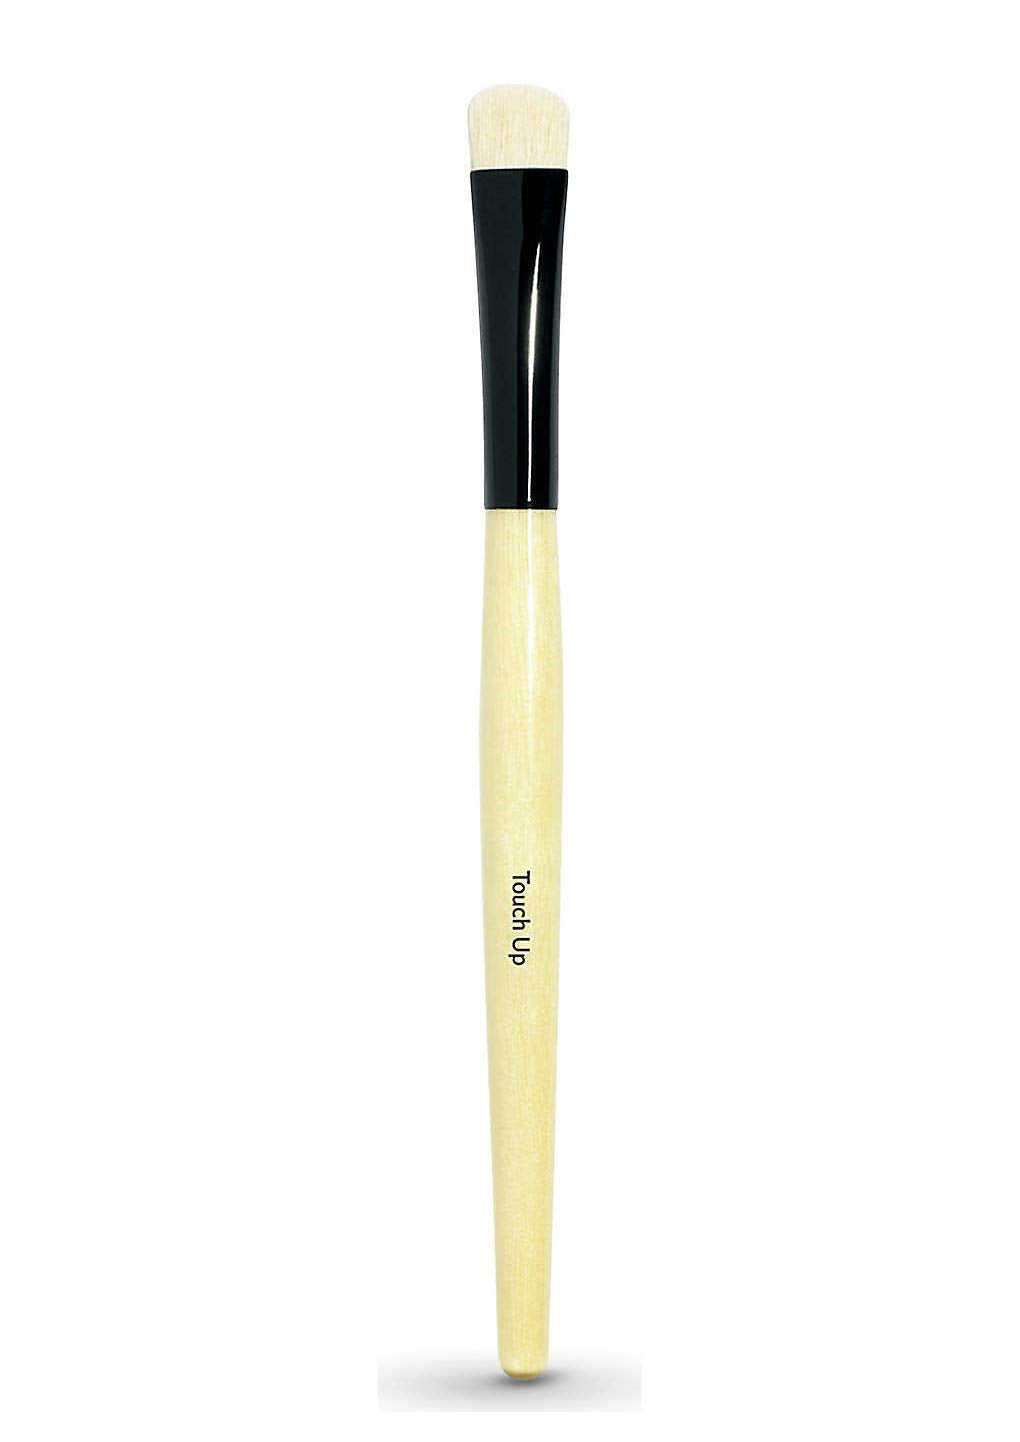 Bobbi Brown Touch Up Brush